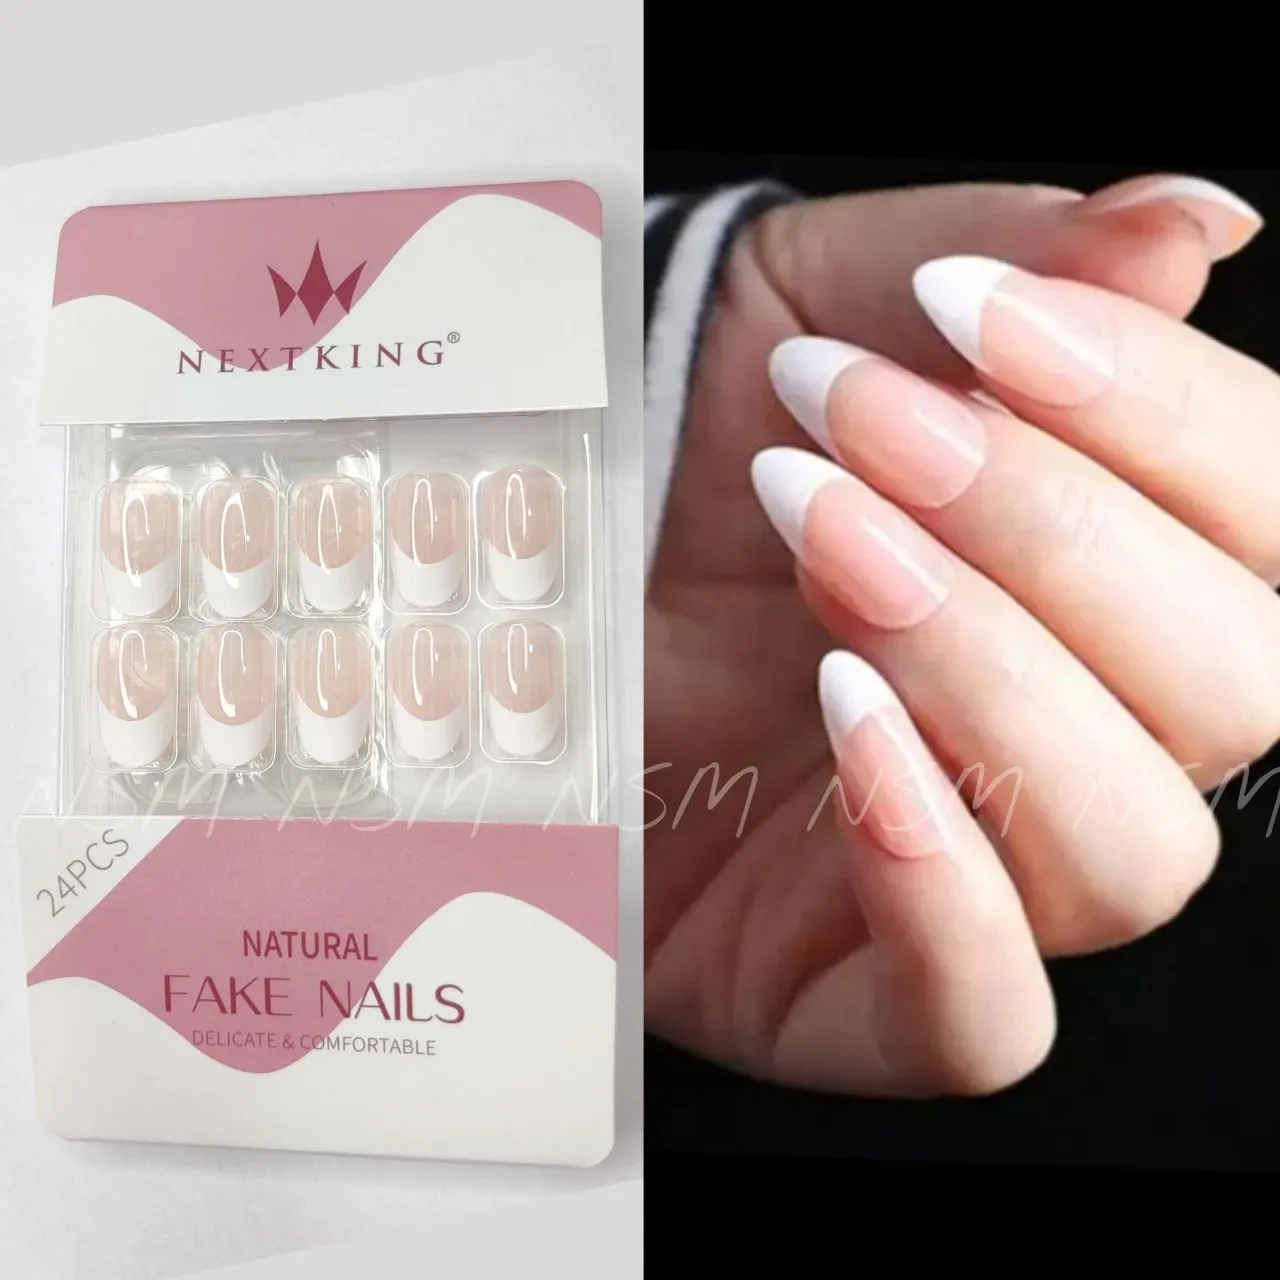 Lick - Press on Nails 30 Pcs Acrylic/Artificial/Fake Reusable Nail  Extension With Application Kit Golden Glittered, Mauve & Maroon - Price in  India, Buy Lick - Press on Nails 30 Pcs Acrylic/Artificial/Fake